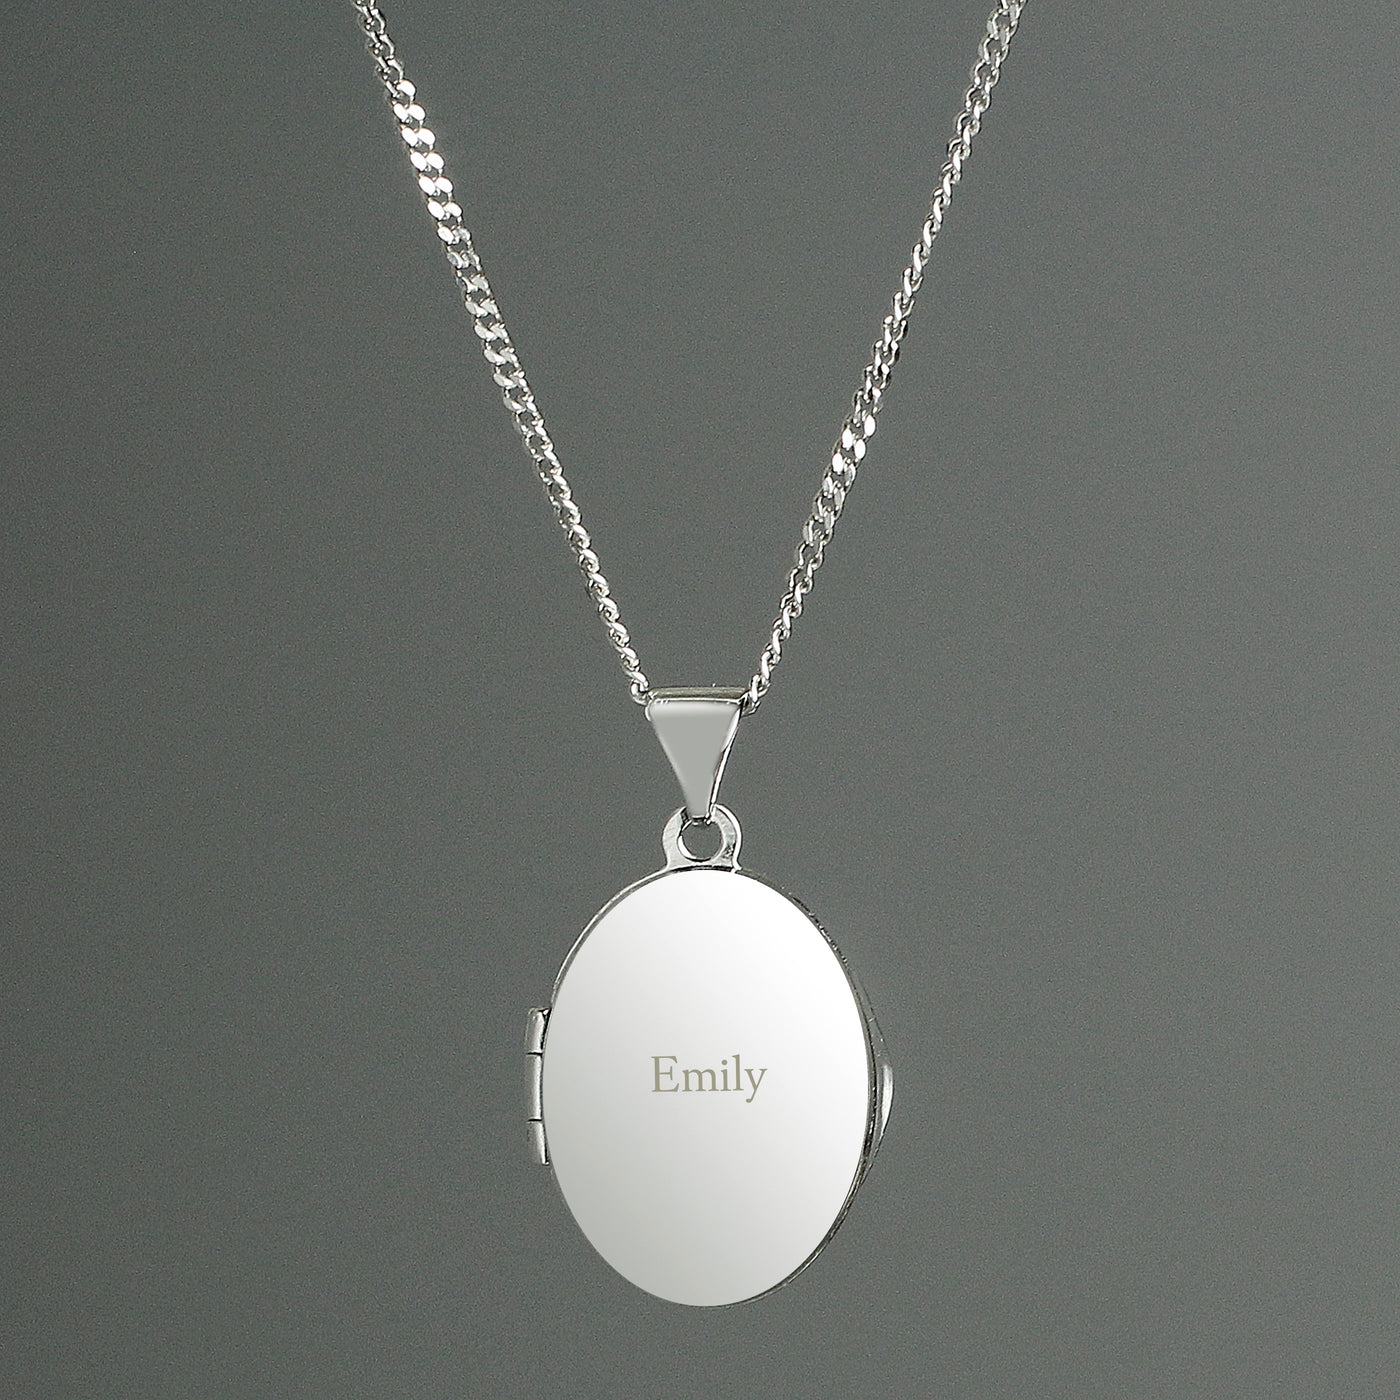 Personalised Sterling Silver Oval Name Locket Necklace - Shop Personalised Gifts